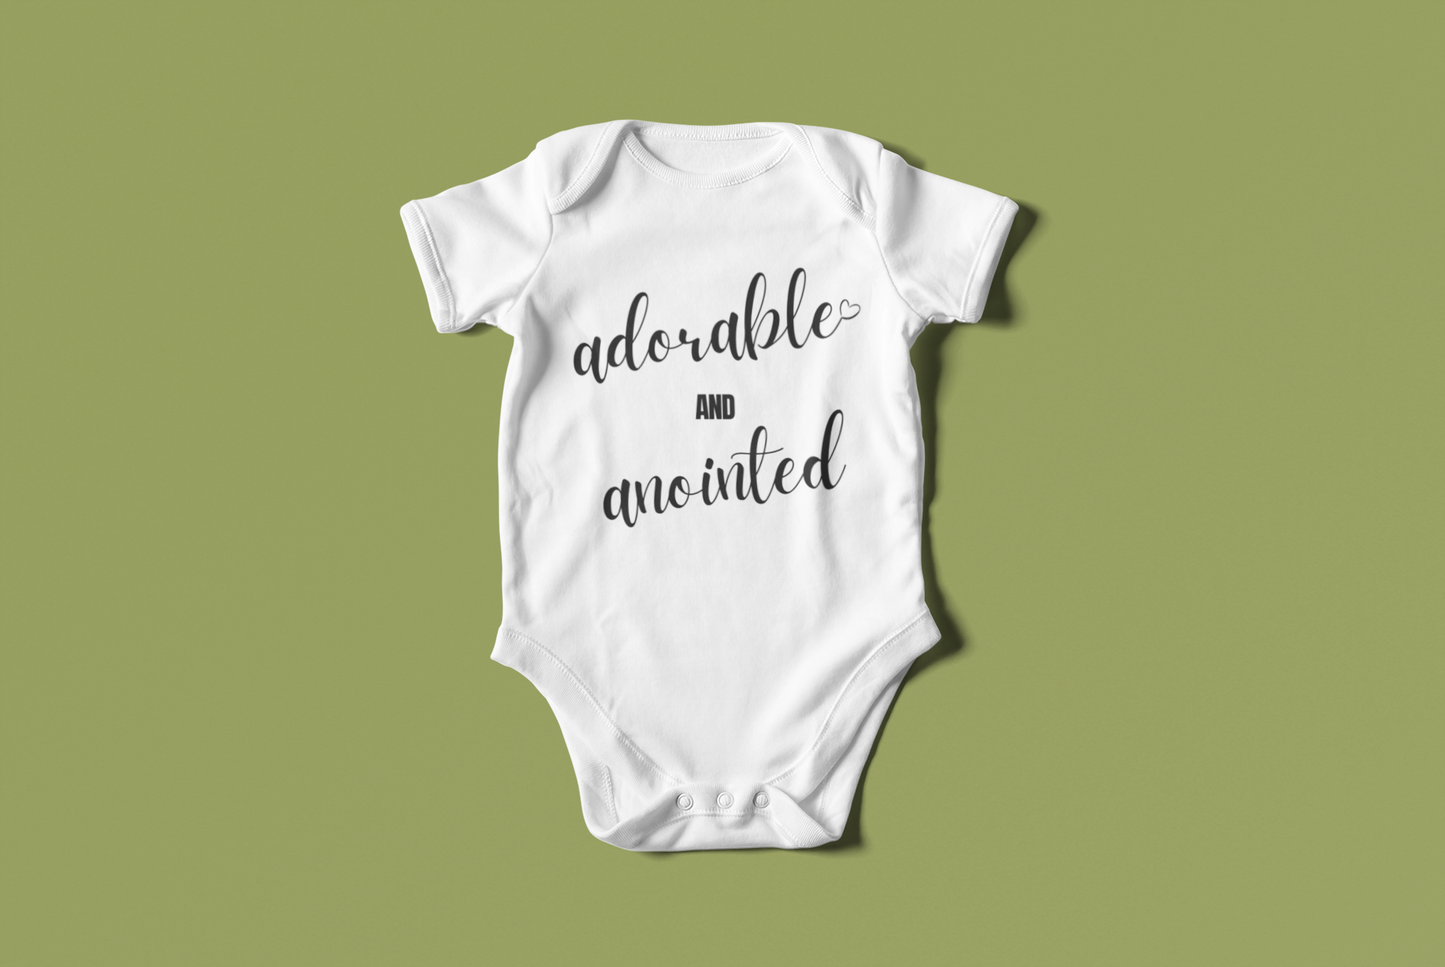 "Adorable and Anointed" Infant Creeper